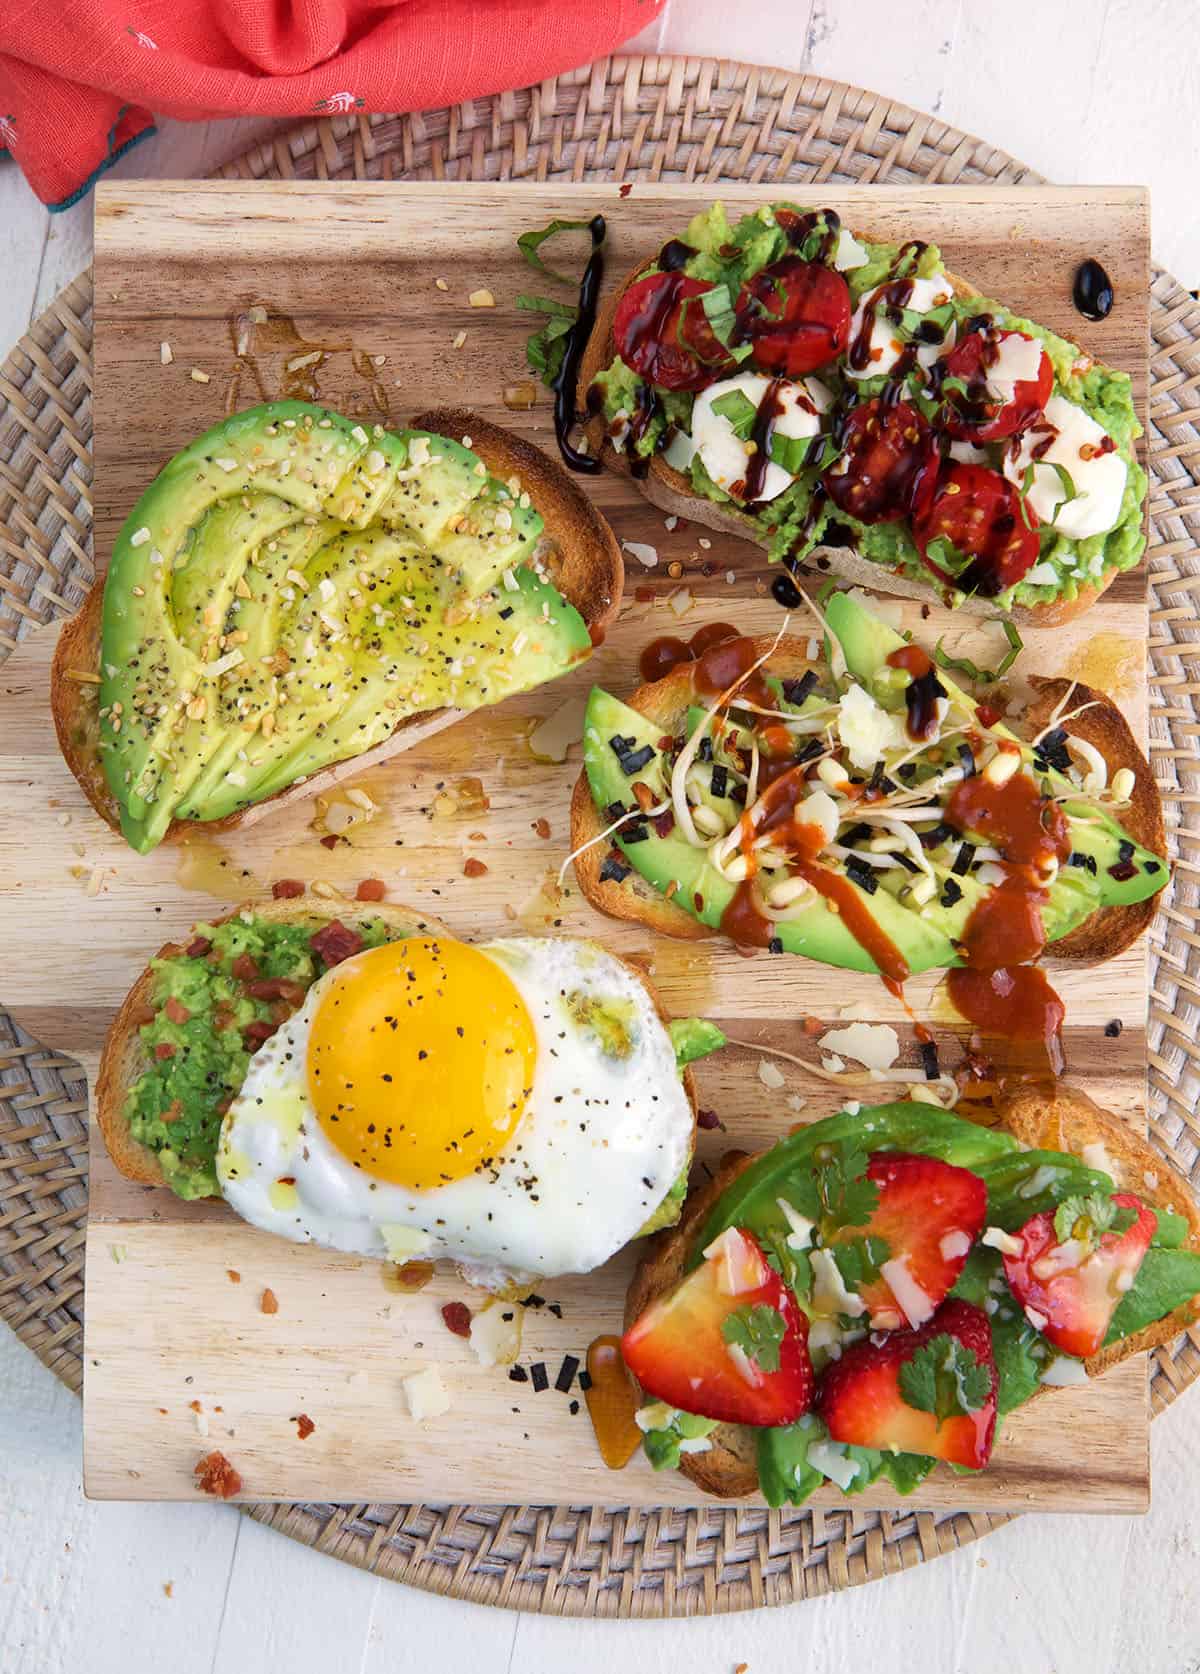 Several pieces of avocado toast are placed on a cutting board.